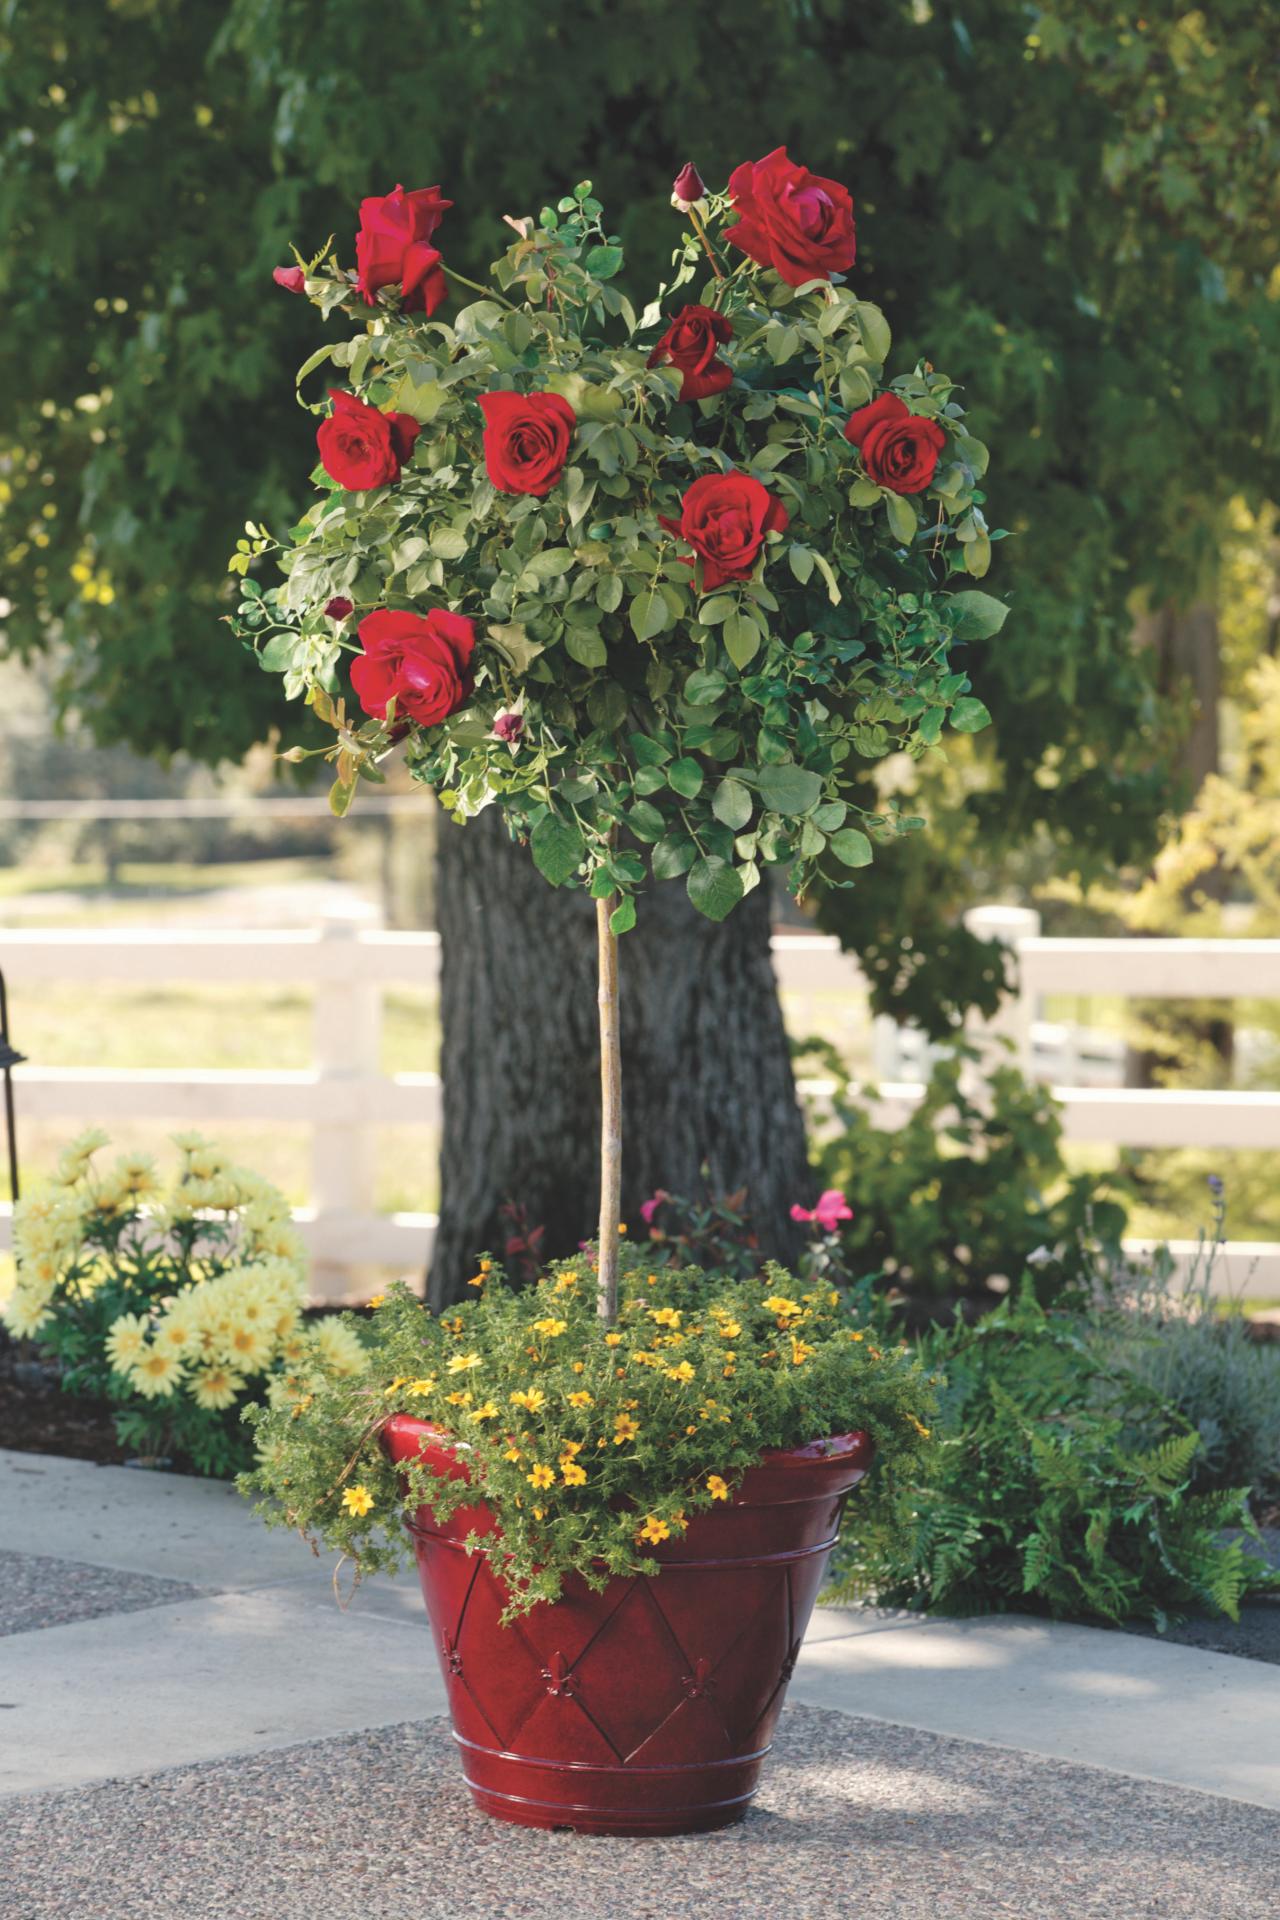 How To Grow Patio Roses In Containers Hgtv,Best Emergency Food